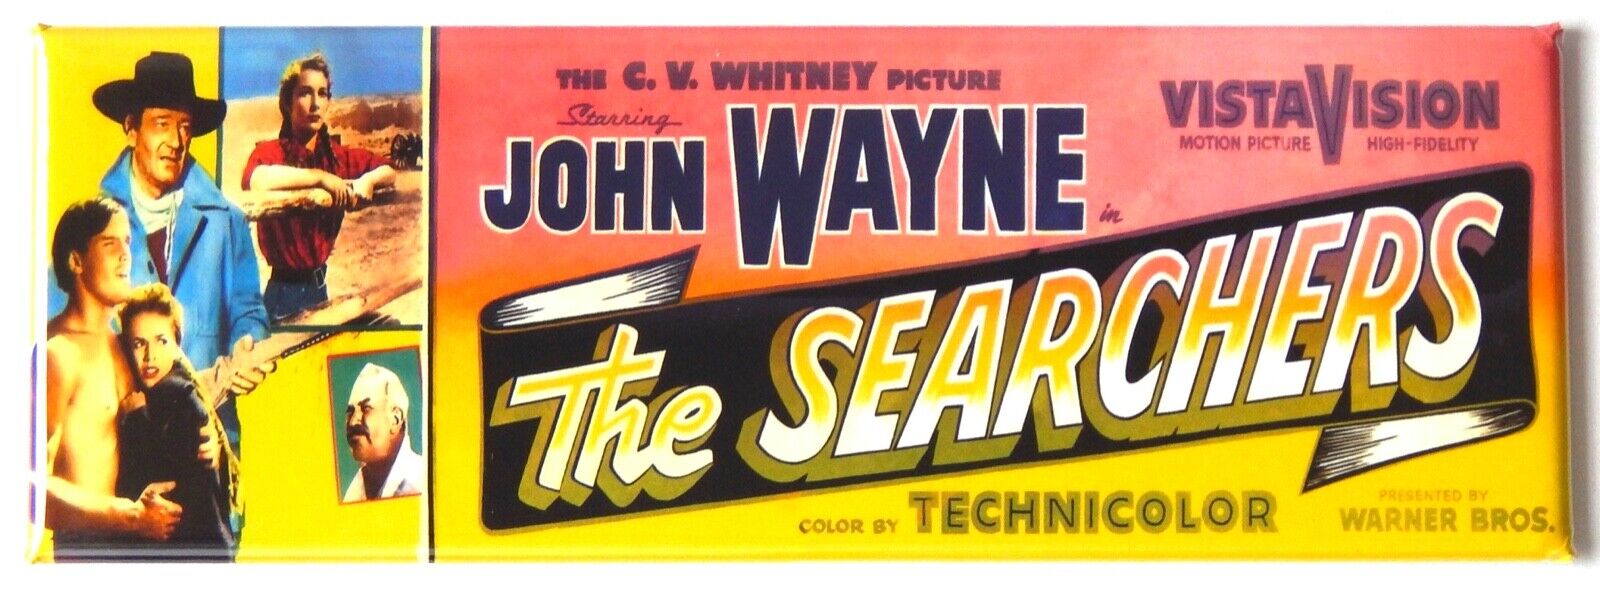 The Searchers FRIDGE MAGNET (1.5 x 4.5 inches) banner movie poster